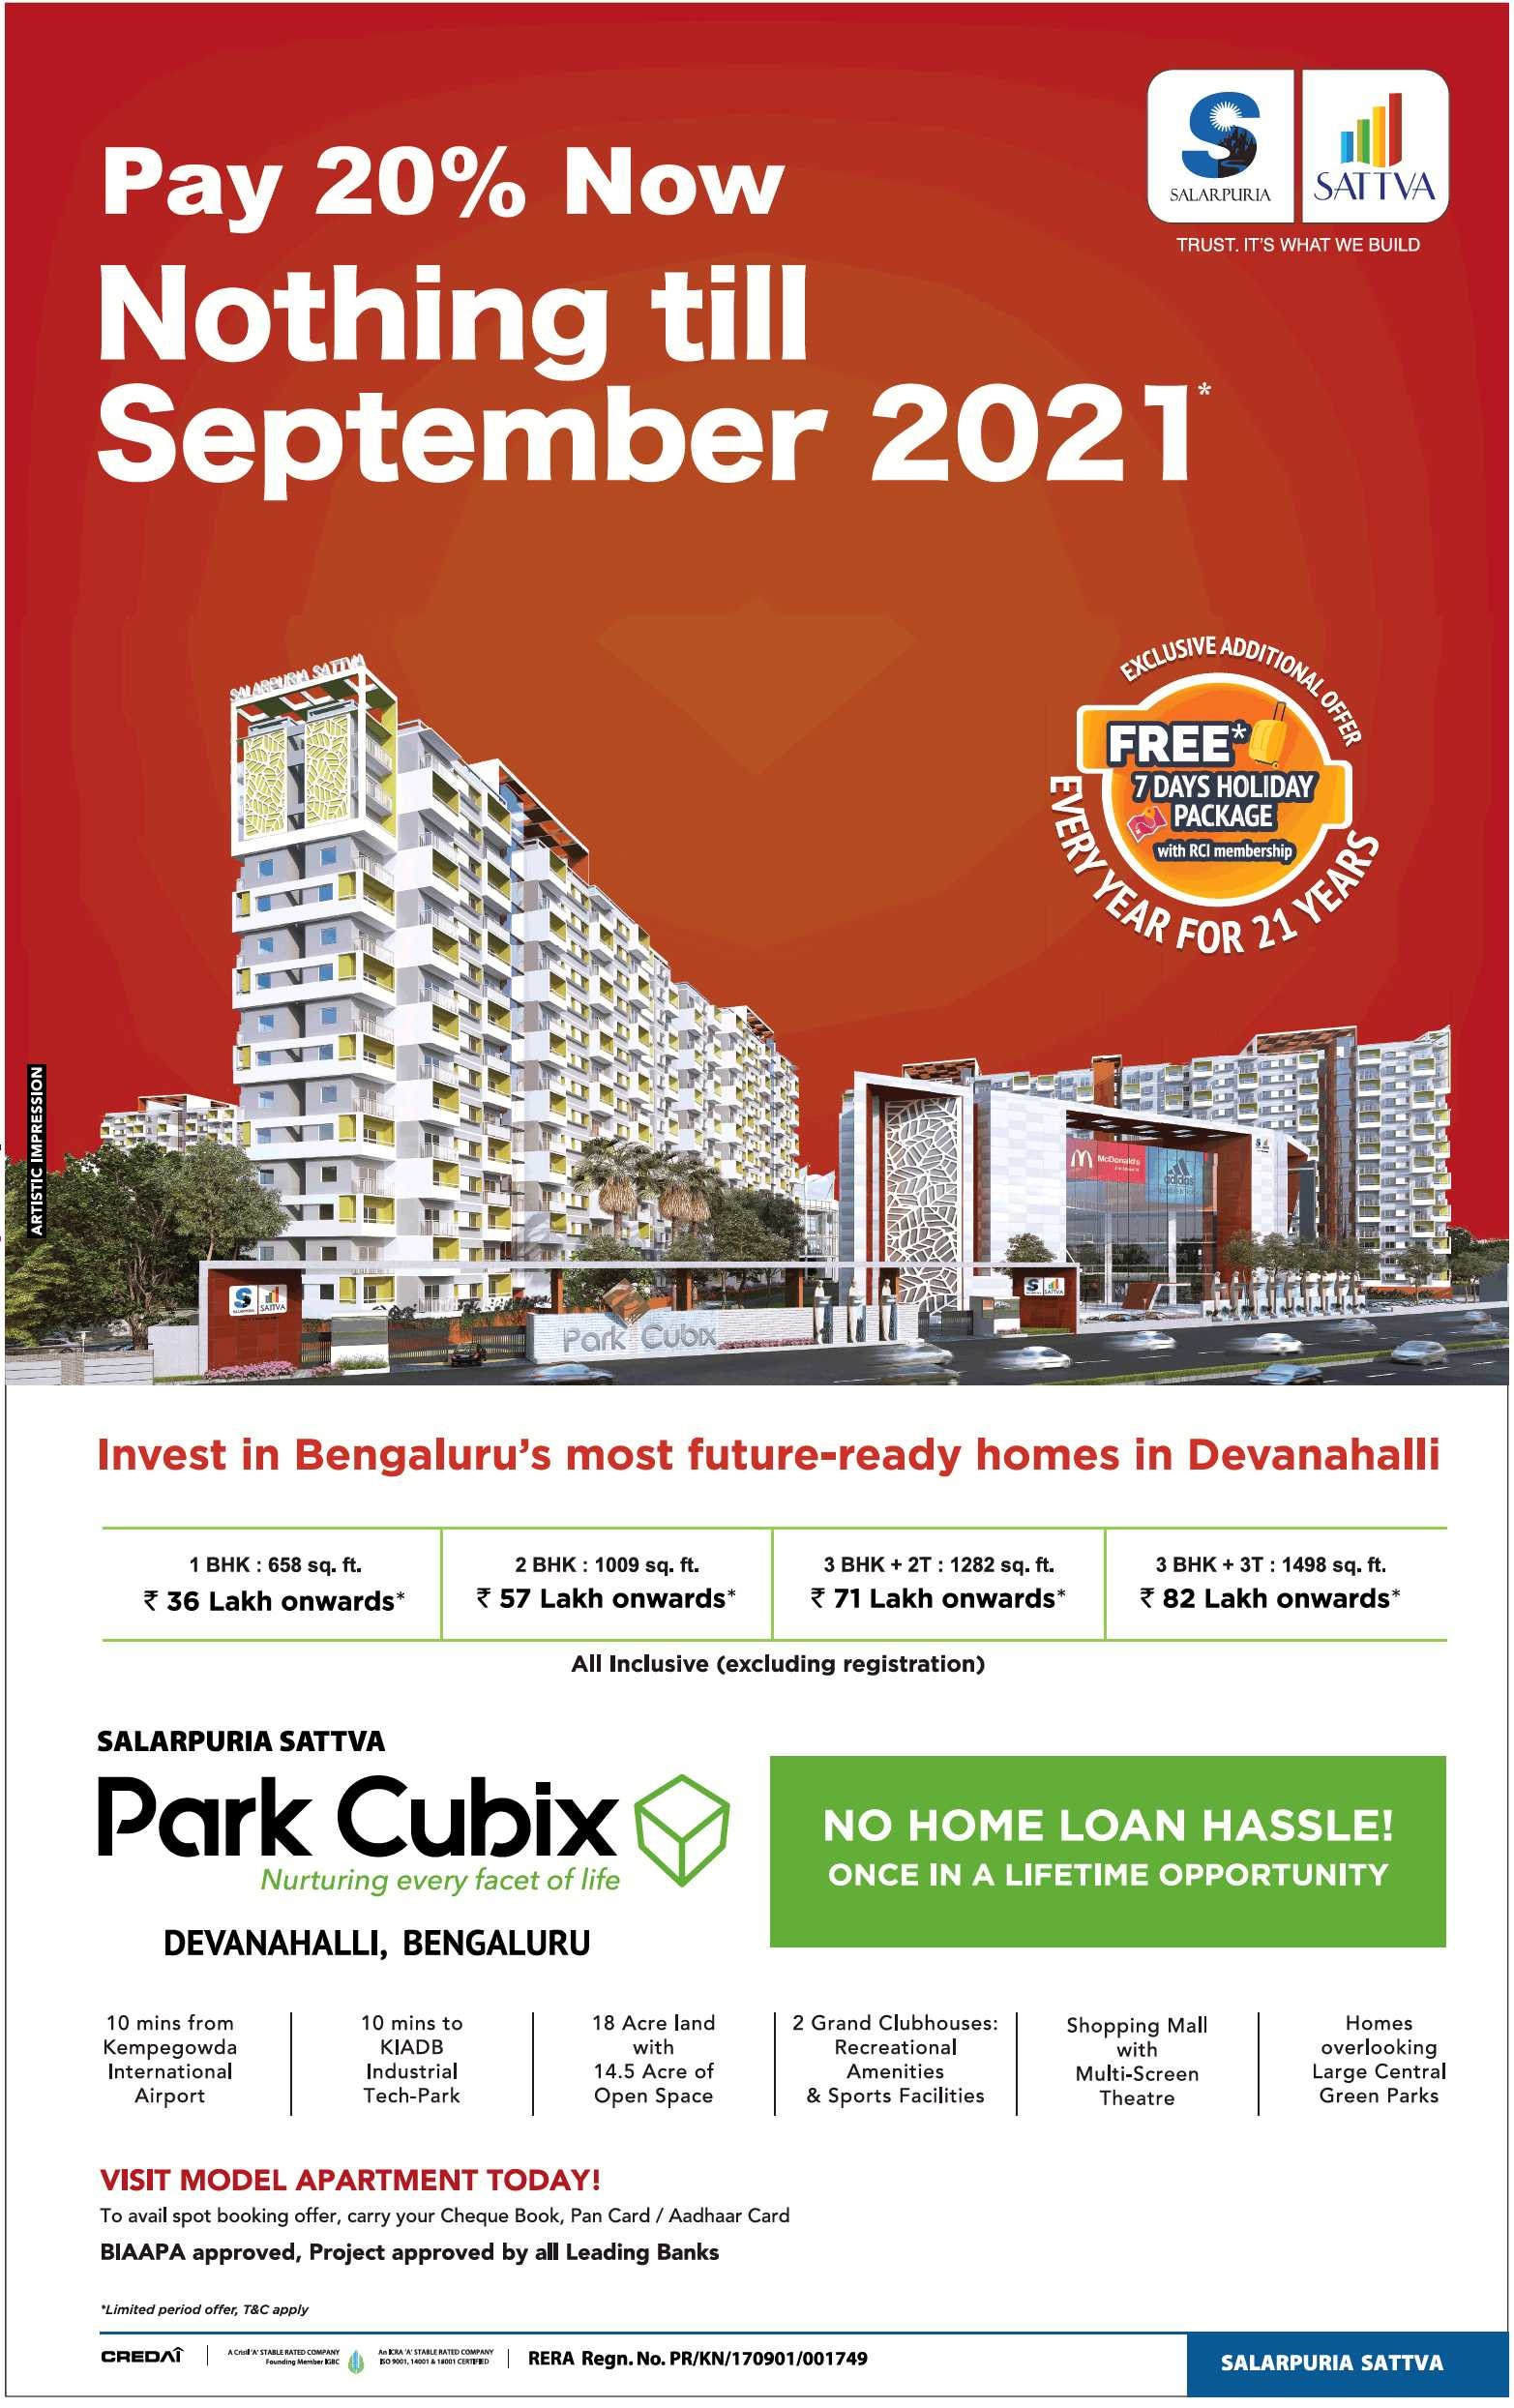 Pay 20% now & nothing till september 2021 at Salarpuria Sattva Park Cubix in Bangalore Update